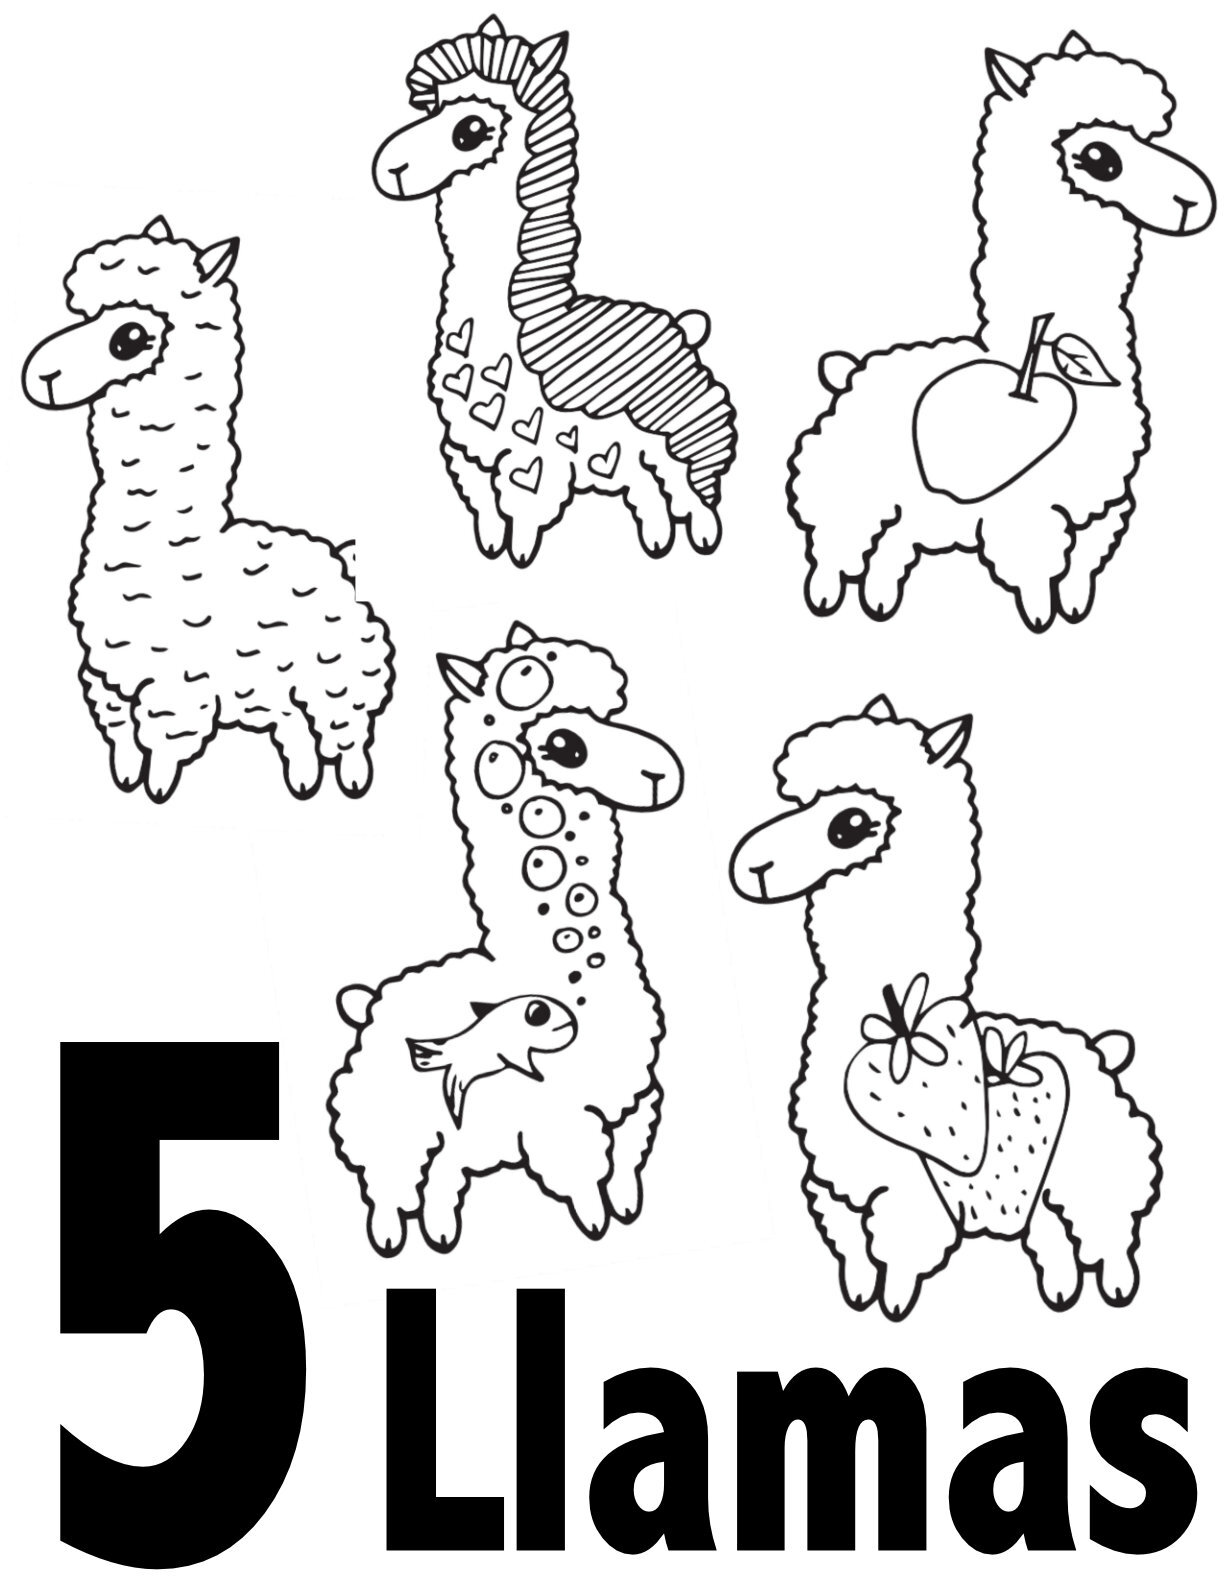 Llama Number Coloring Pages Collection 1-10 - Free Preschool/Kindergarten Printable - Number 5CLICK TO DOWNLOAD THE 5 LLAMA PAGE ONLY